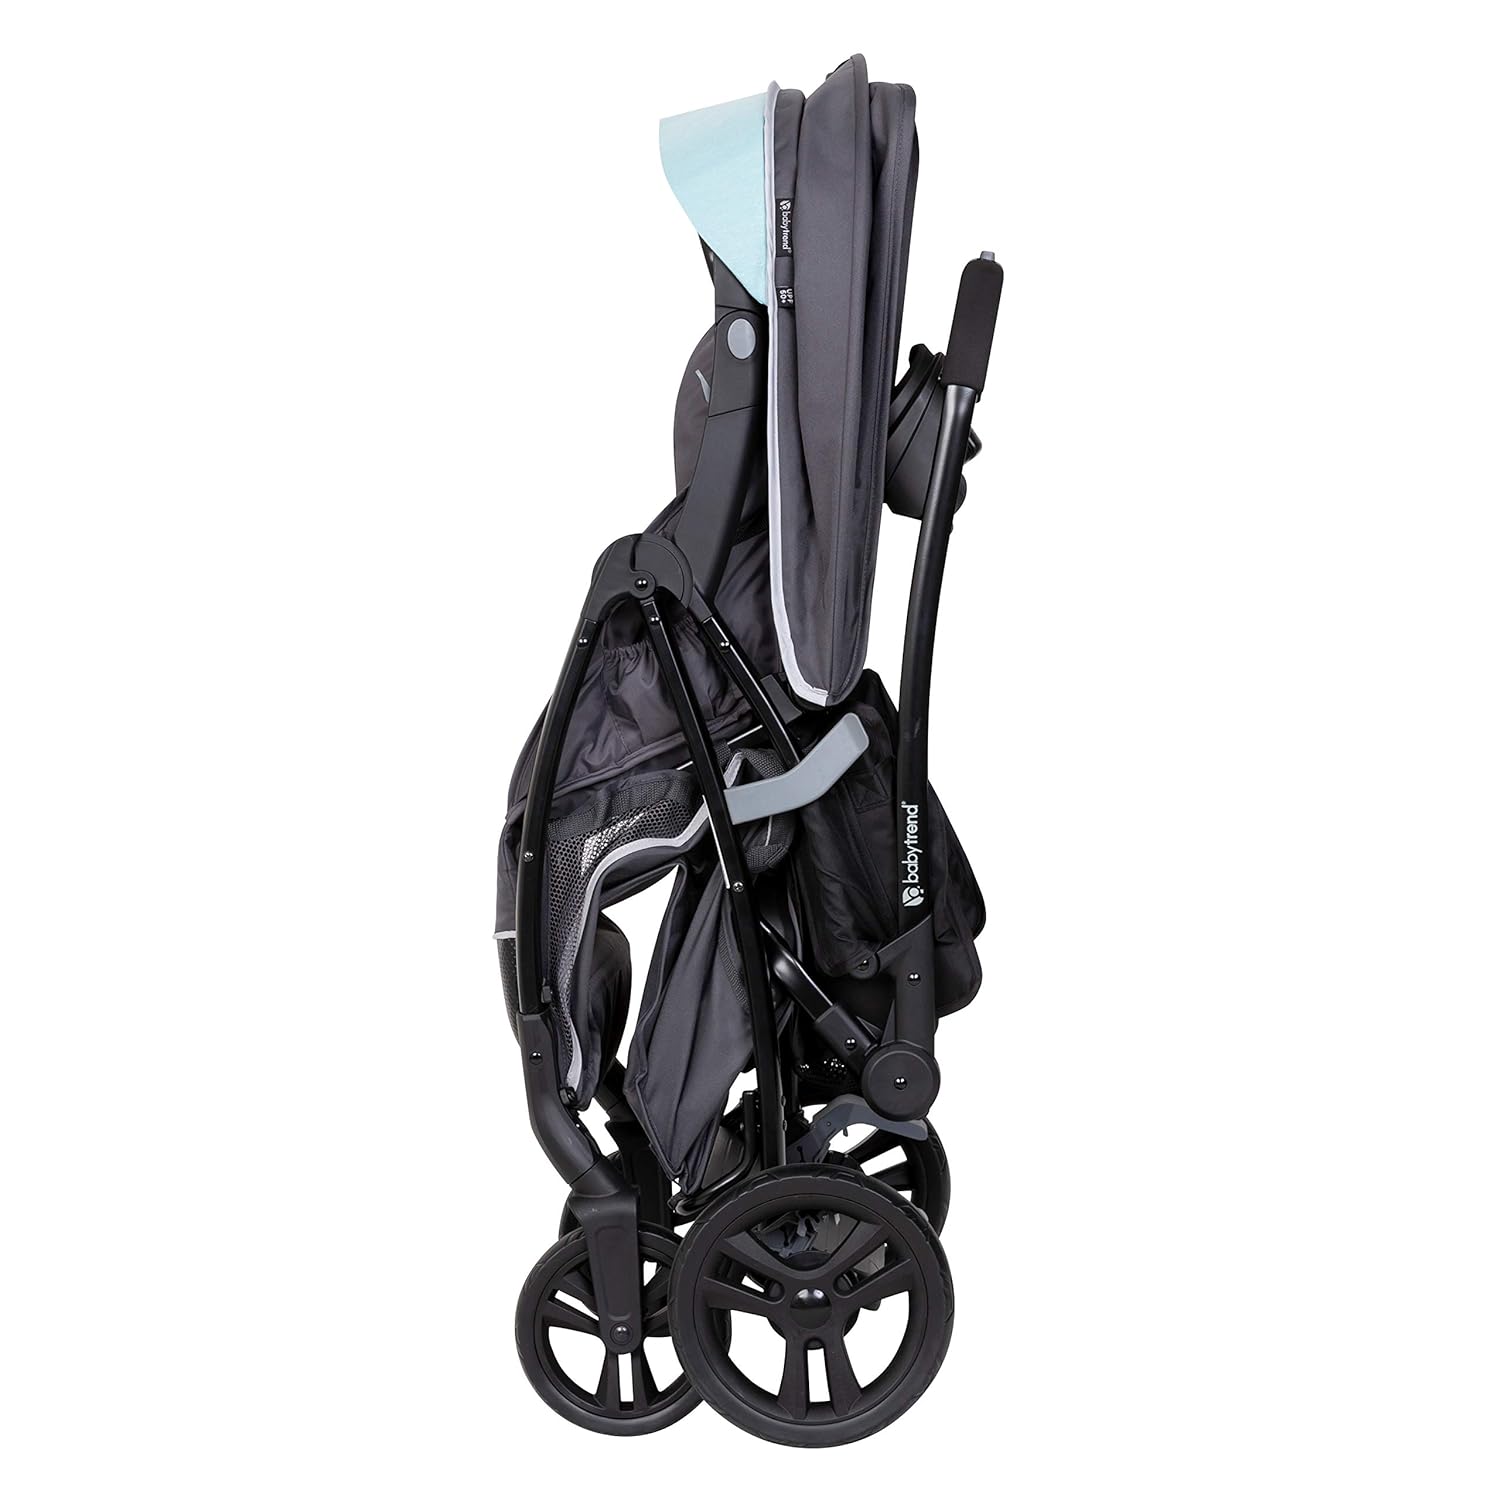 Baby Trend Sit N Stand Ultra Stroller, Millennium - Baby Trend Sit N' Stand Ultra Stroller Millennium Review